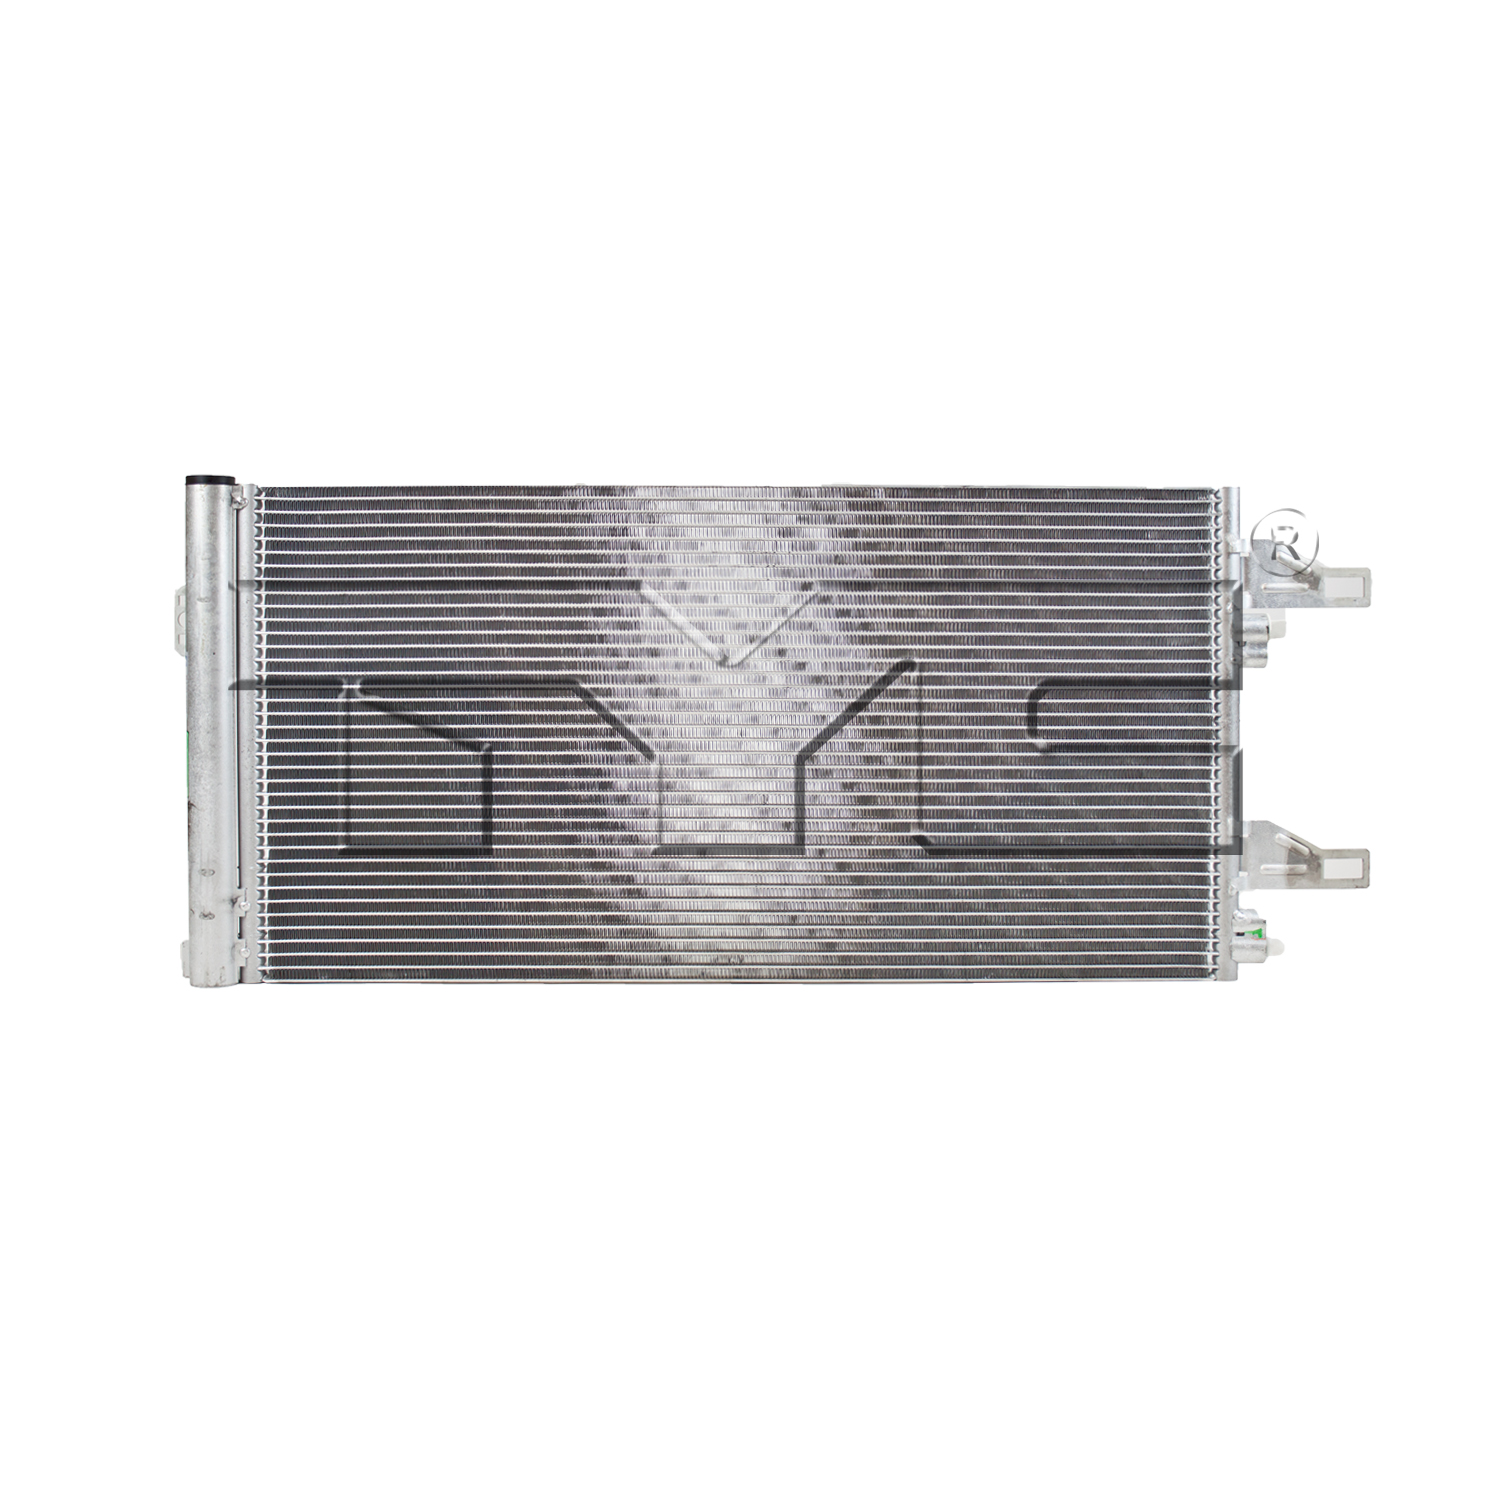 Aftermarket AC CONDENSERS for RAM - PROMASTER 3500, PROMASTER 3500,14-23,Air conditioning condenser